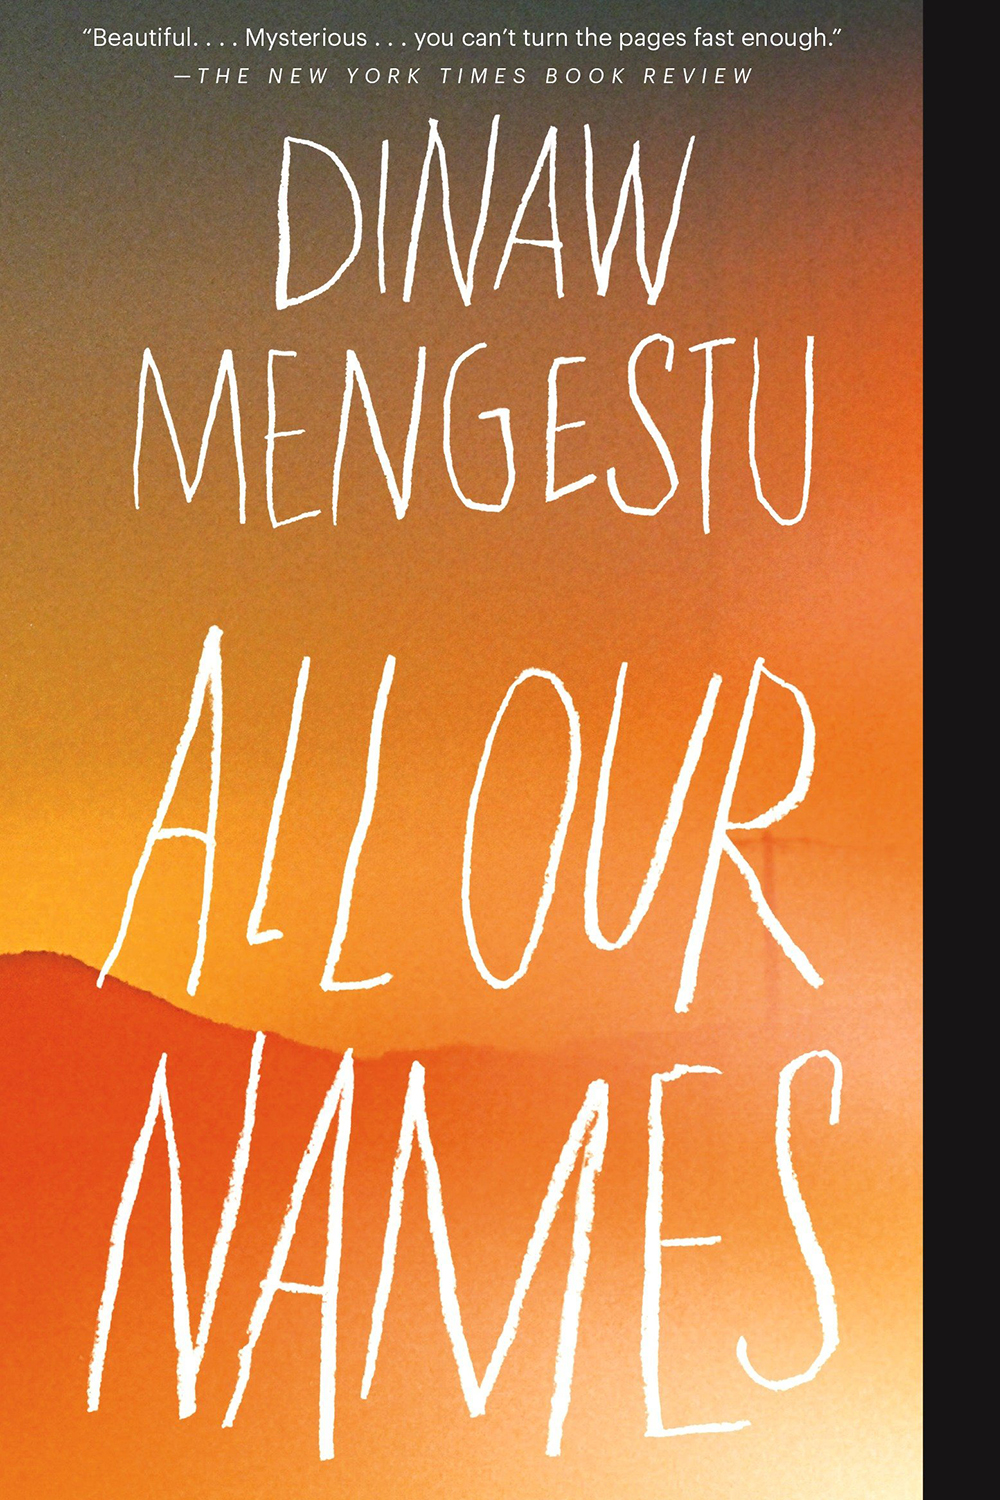 All Our Names, by Dinaw Mengestu